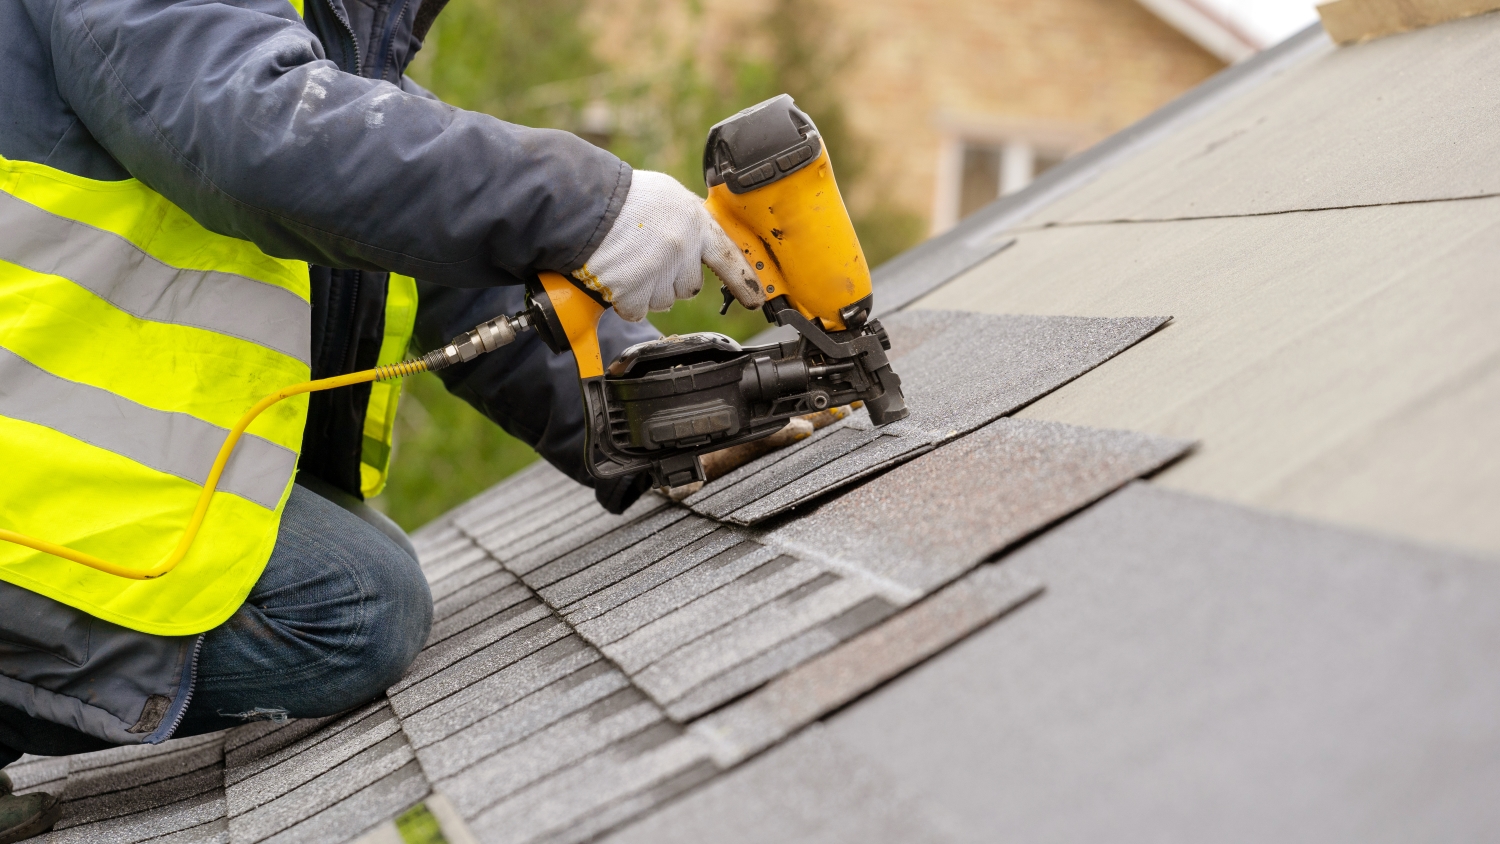 A man drilling into the shingles, likely for installation or repair purposes.